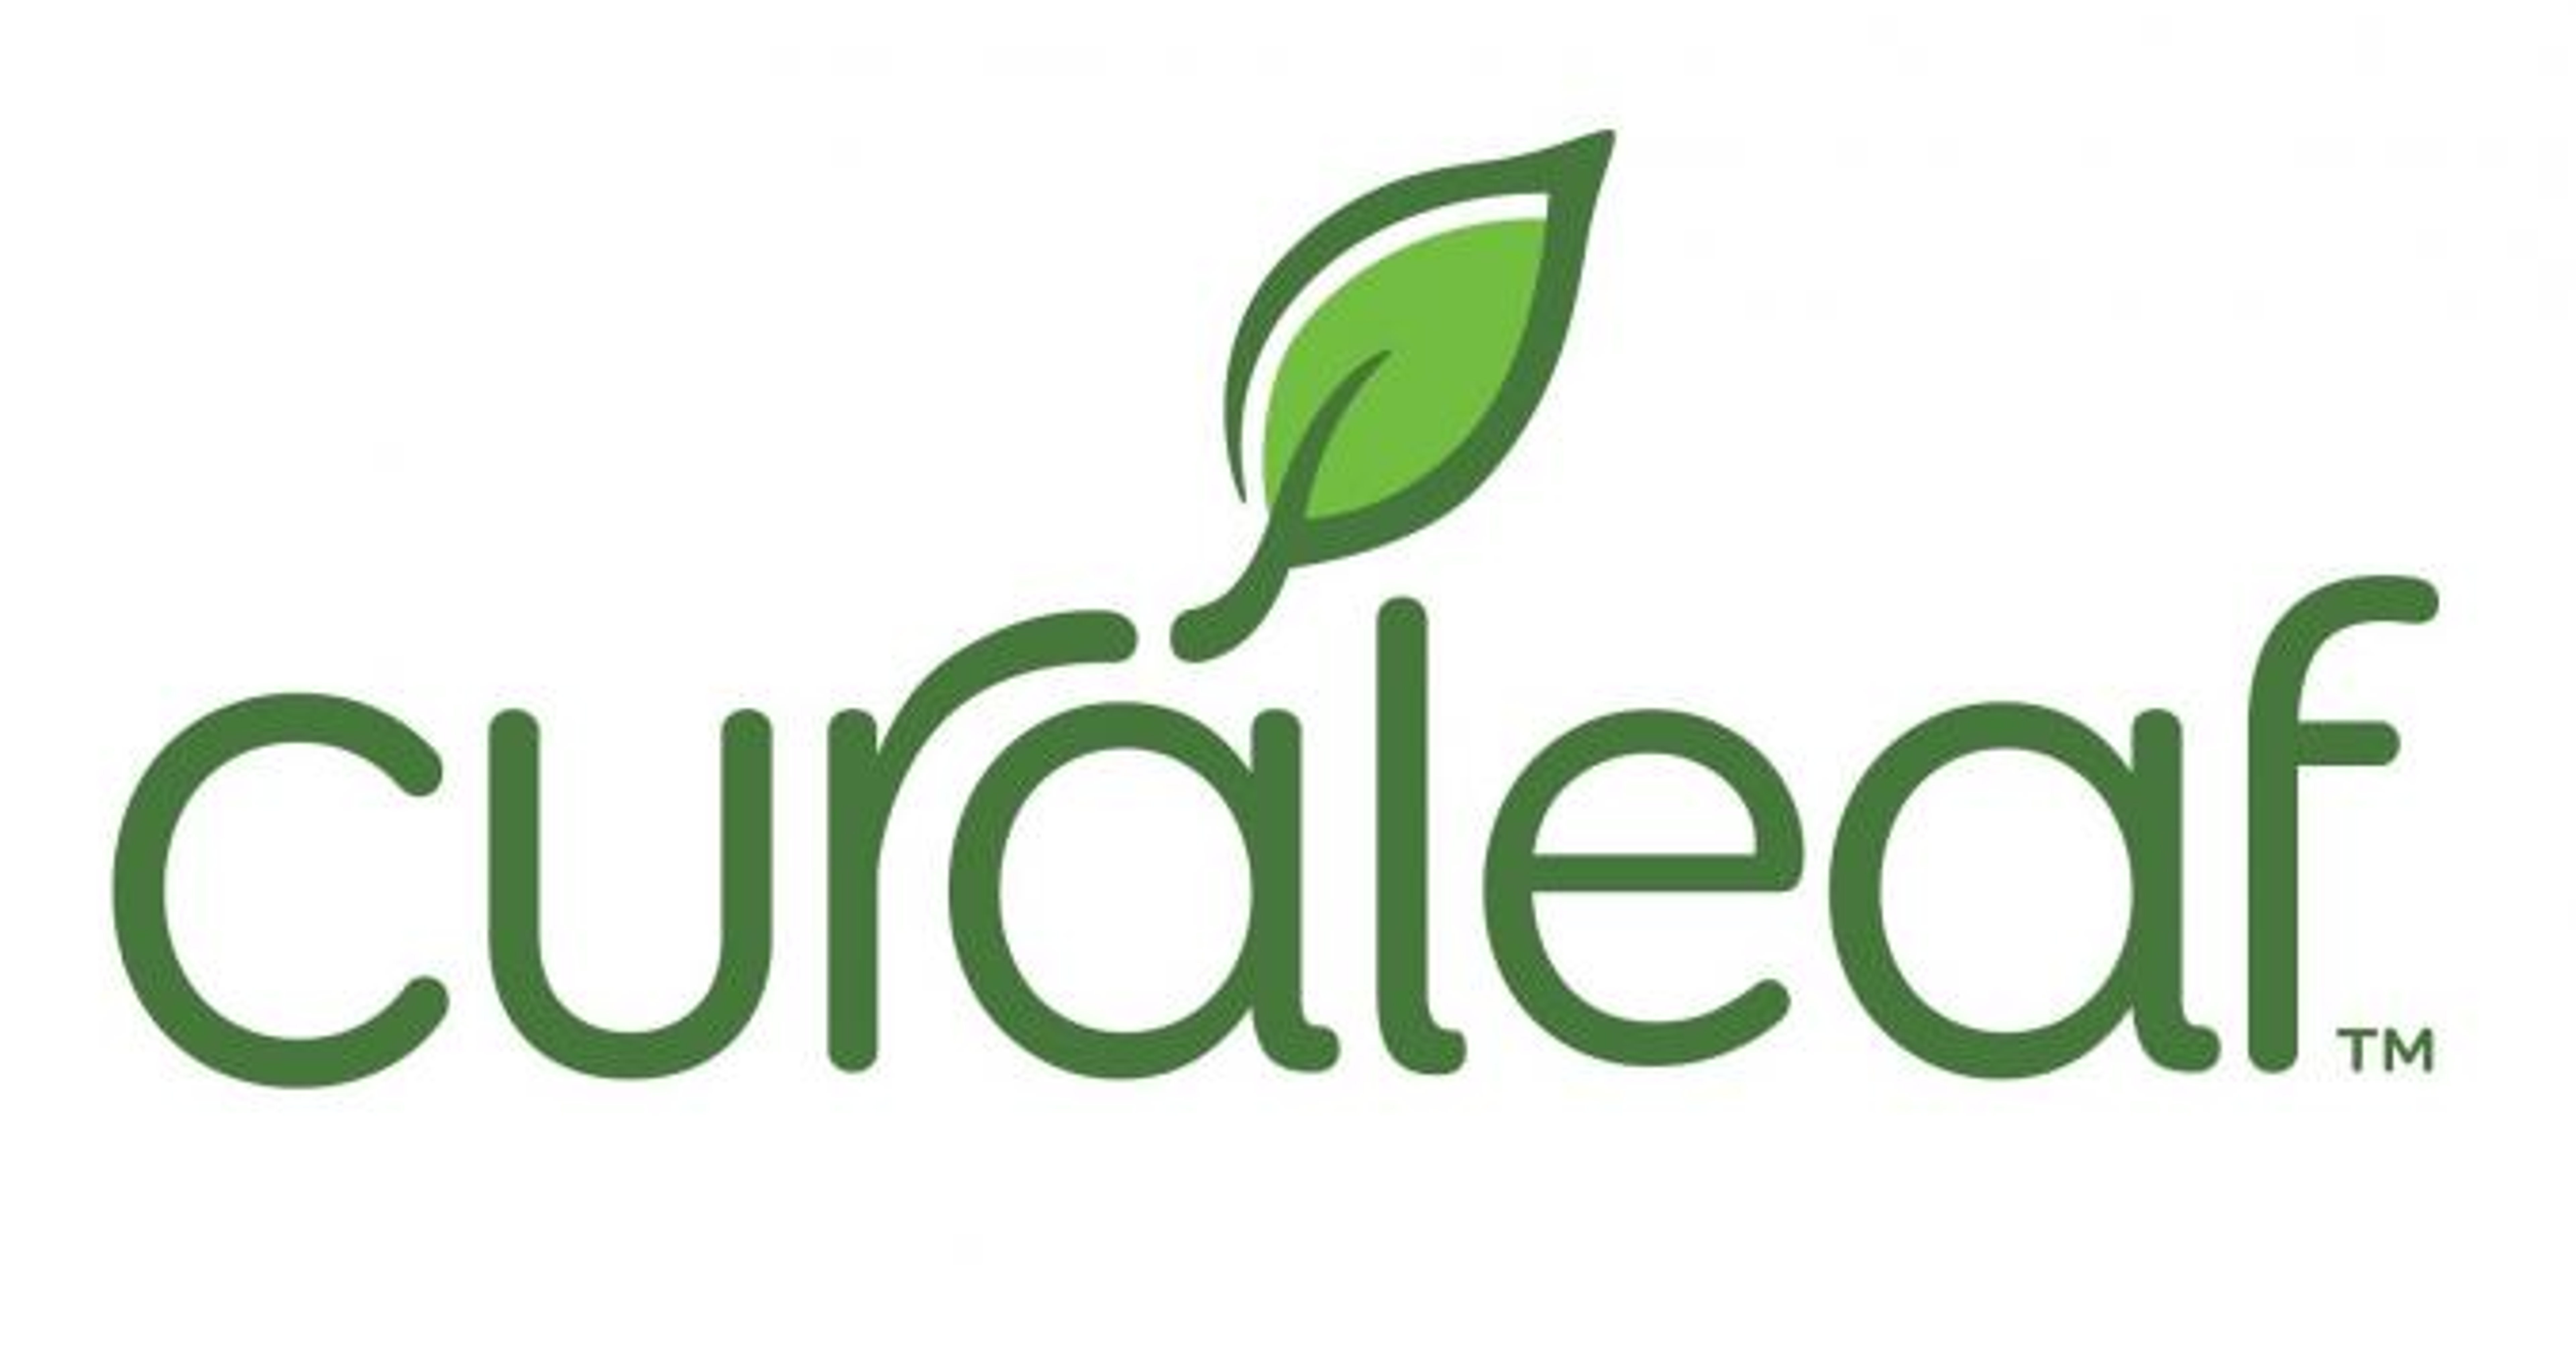 EXCLUSIVE: Curaleaf Celebrates Opening Of New Dispensary In Lancaster, PA, Marking 134 Nationwide